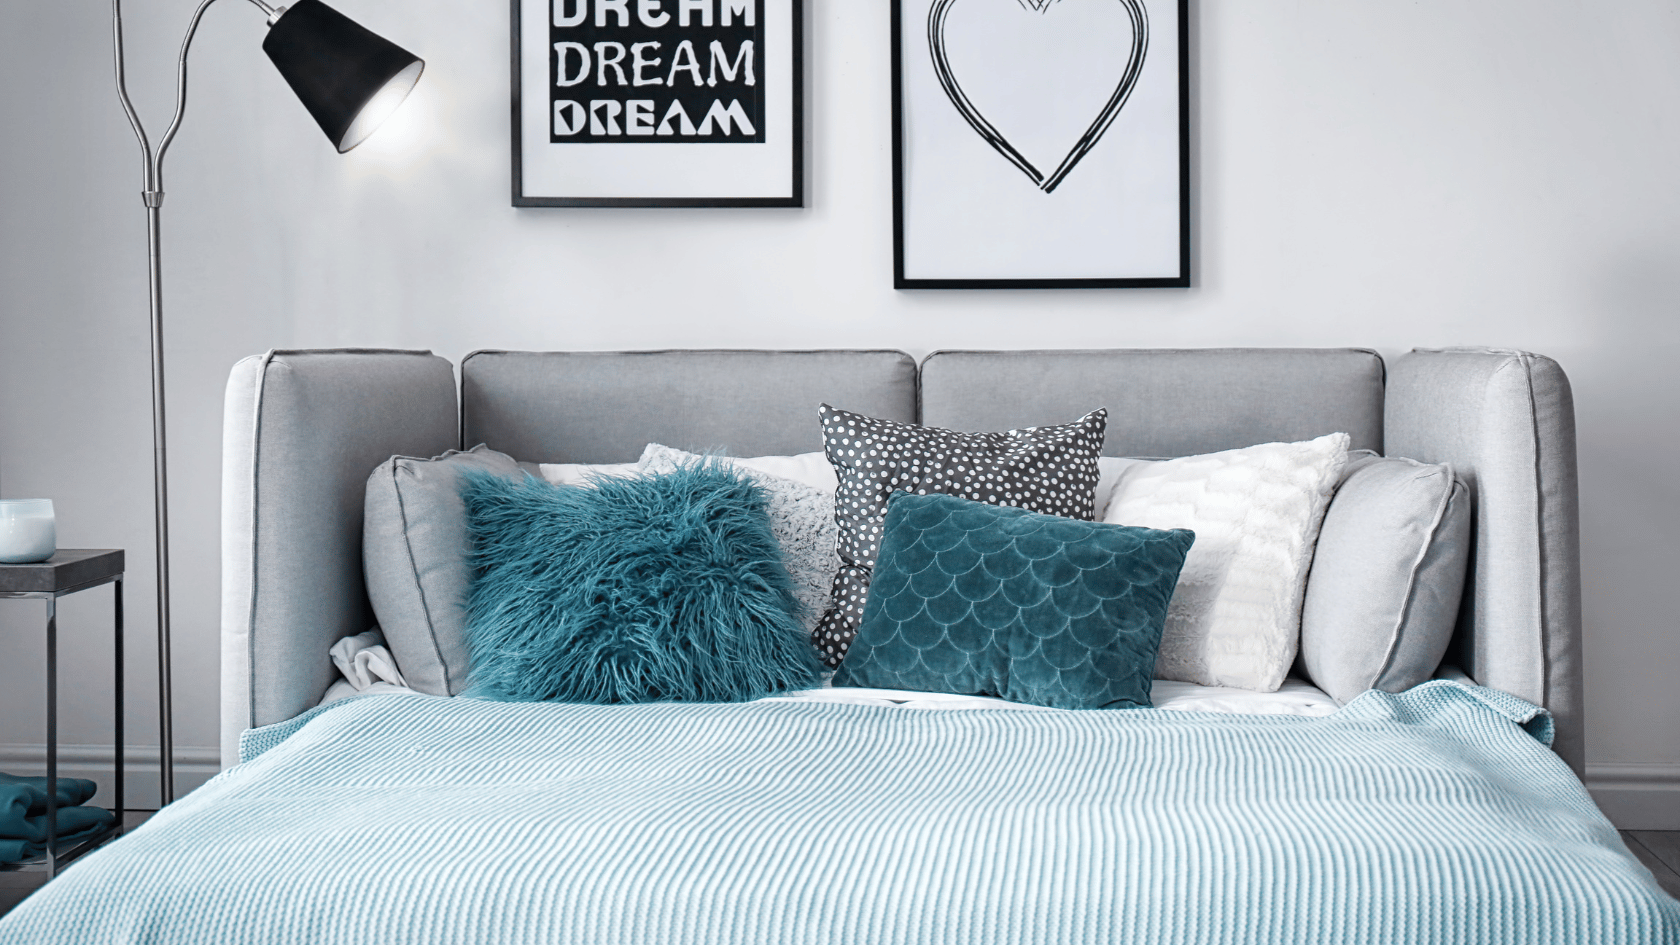 My Ultimate Guide to Choosing a Double Sleeper Sofa: Answering Your Top 20 Questions